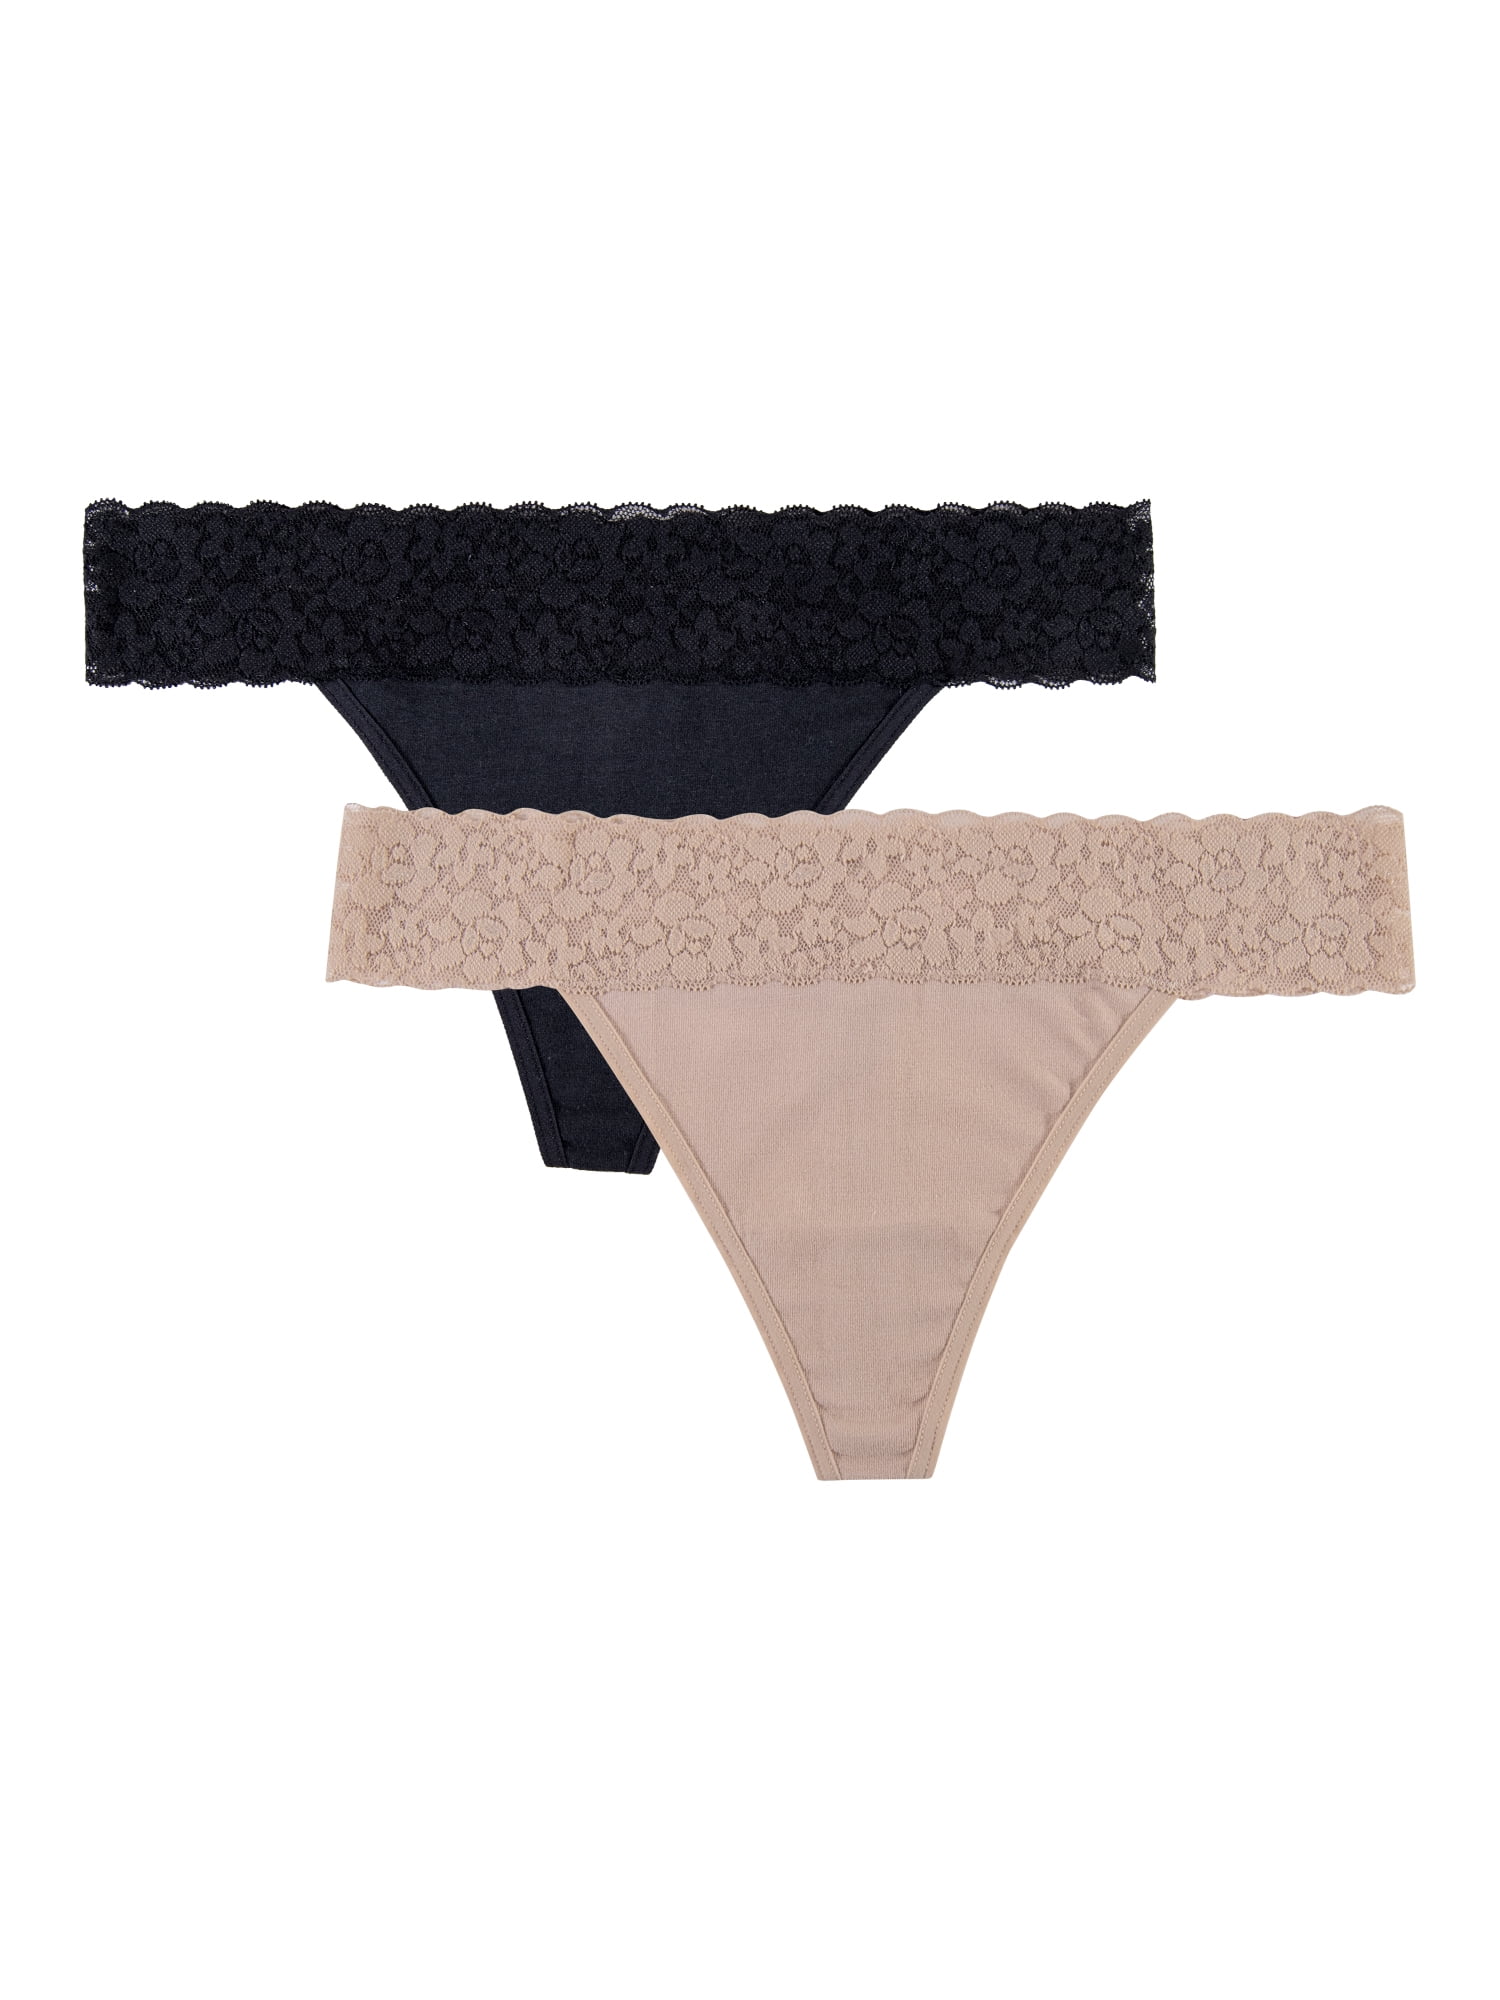 The Bra Lab Women's Thong with Lace Panties, 2-Pack 